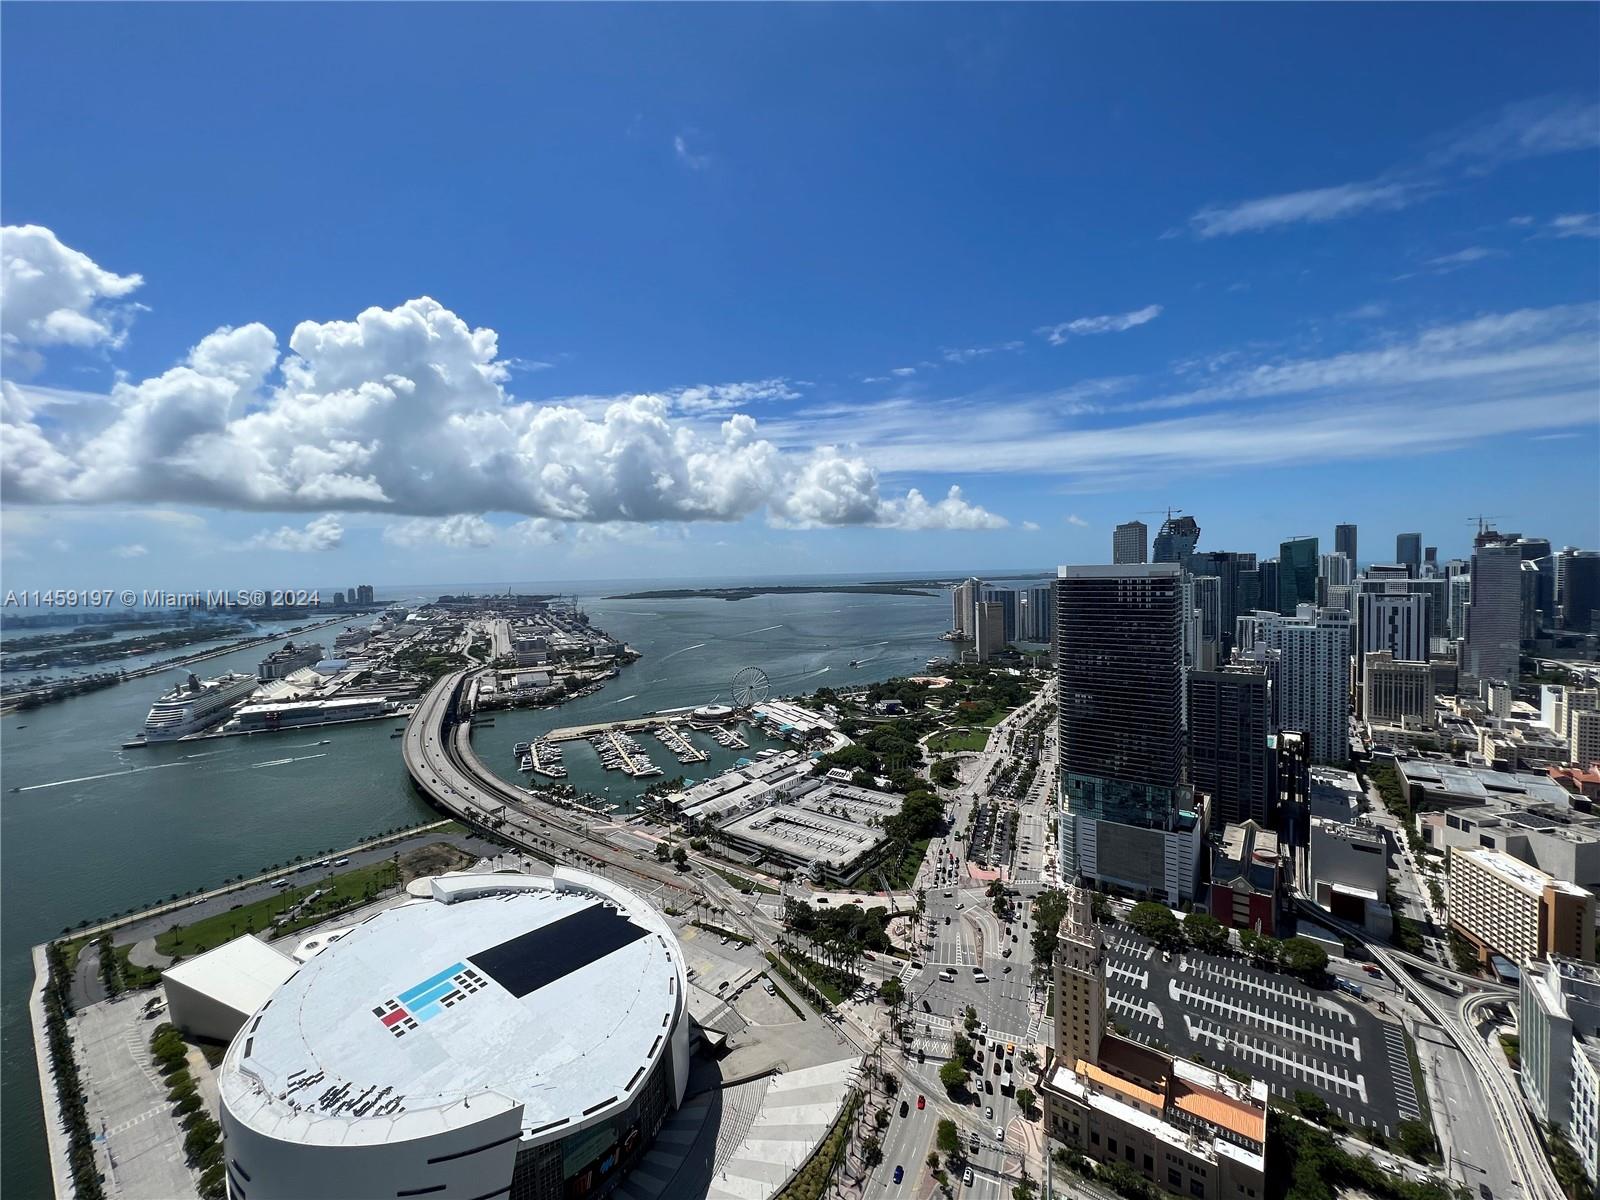 DUPLEX PENTHOUSE IN MARINA BLUE! Spectacular views 3 bedroom + 3.5 bathroom Condo in Downtown Miami. WON'T LAST! --- Unit with stainless steel appliances, W&D, with new floors installed June 2022!. Conveniently located across the street from the former AA arena, just minutes from the beaches, Design District, Museum Park, The Opera and Ballet, Art Museum and Fine Dining. Great building amenities: sunrise and sunset pools, 2 hot tubs, 24-hr security and concierge, valet parking, business center, fitness center, club room.